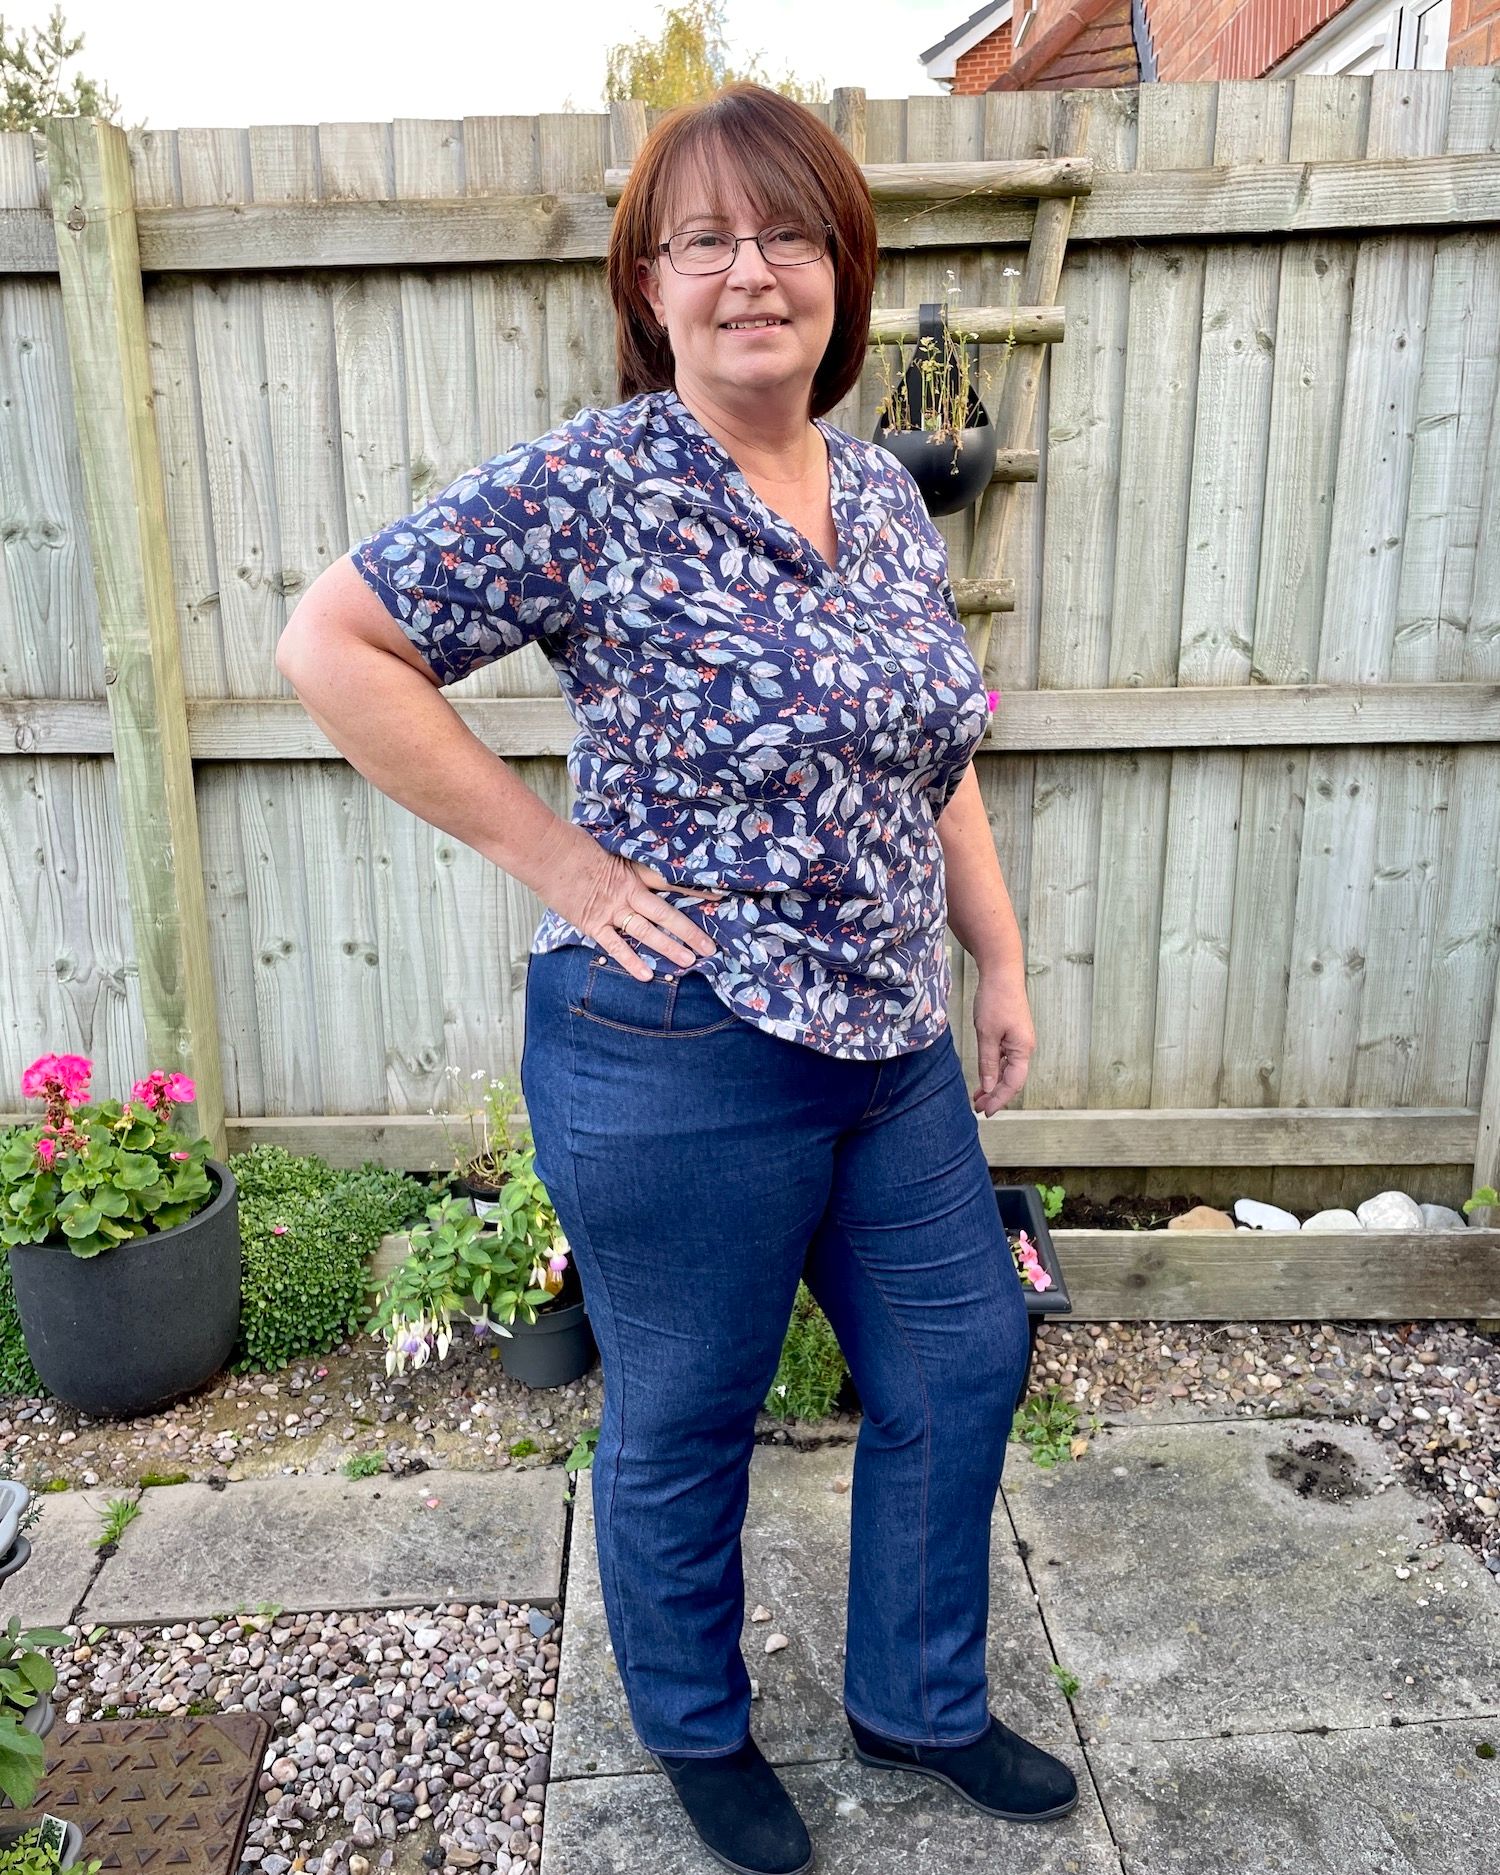 The Legato Jeans - My Tips for Making Jeans - Just Sew Helen's Sewing Diary